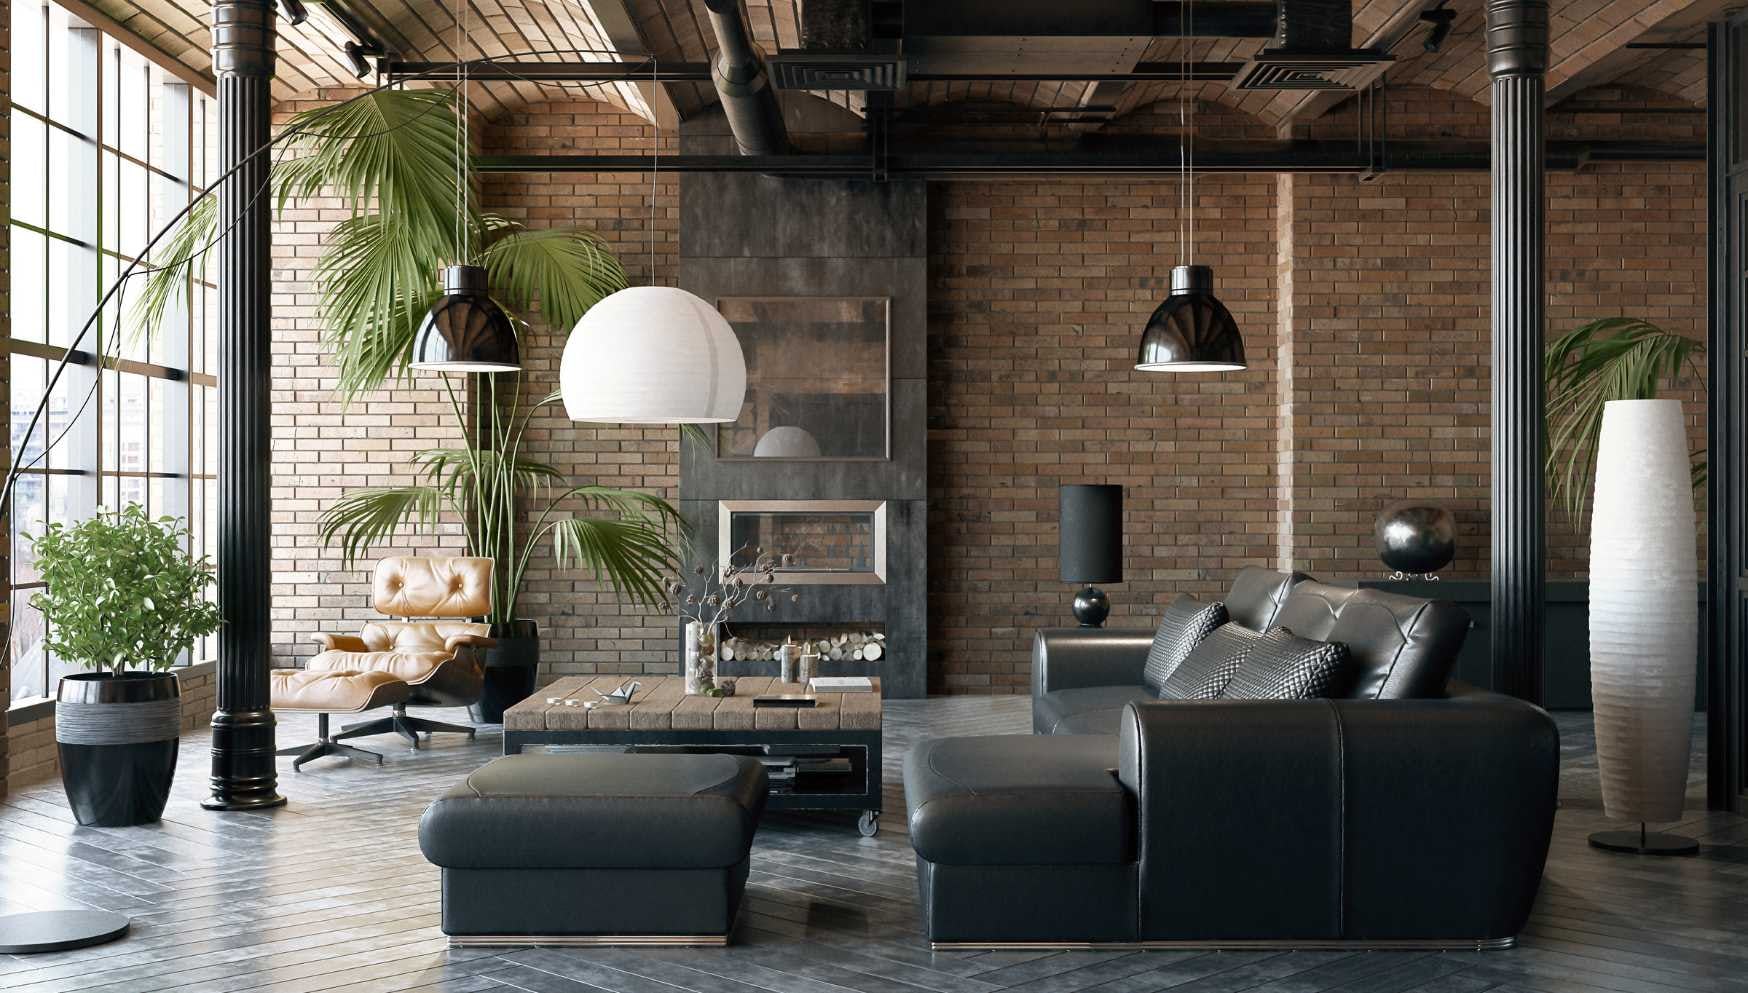 Decorating with houseplants to match your industrial interior style